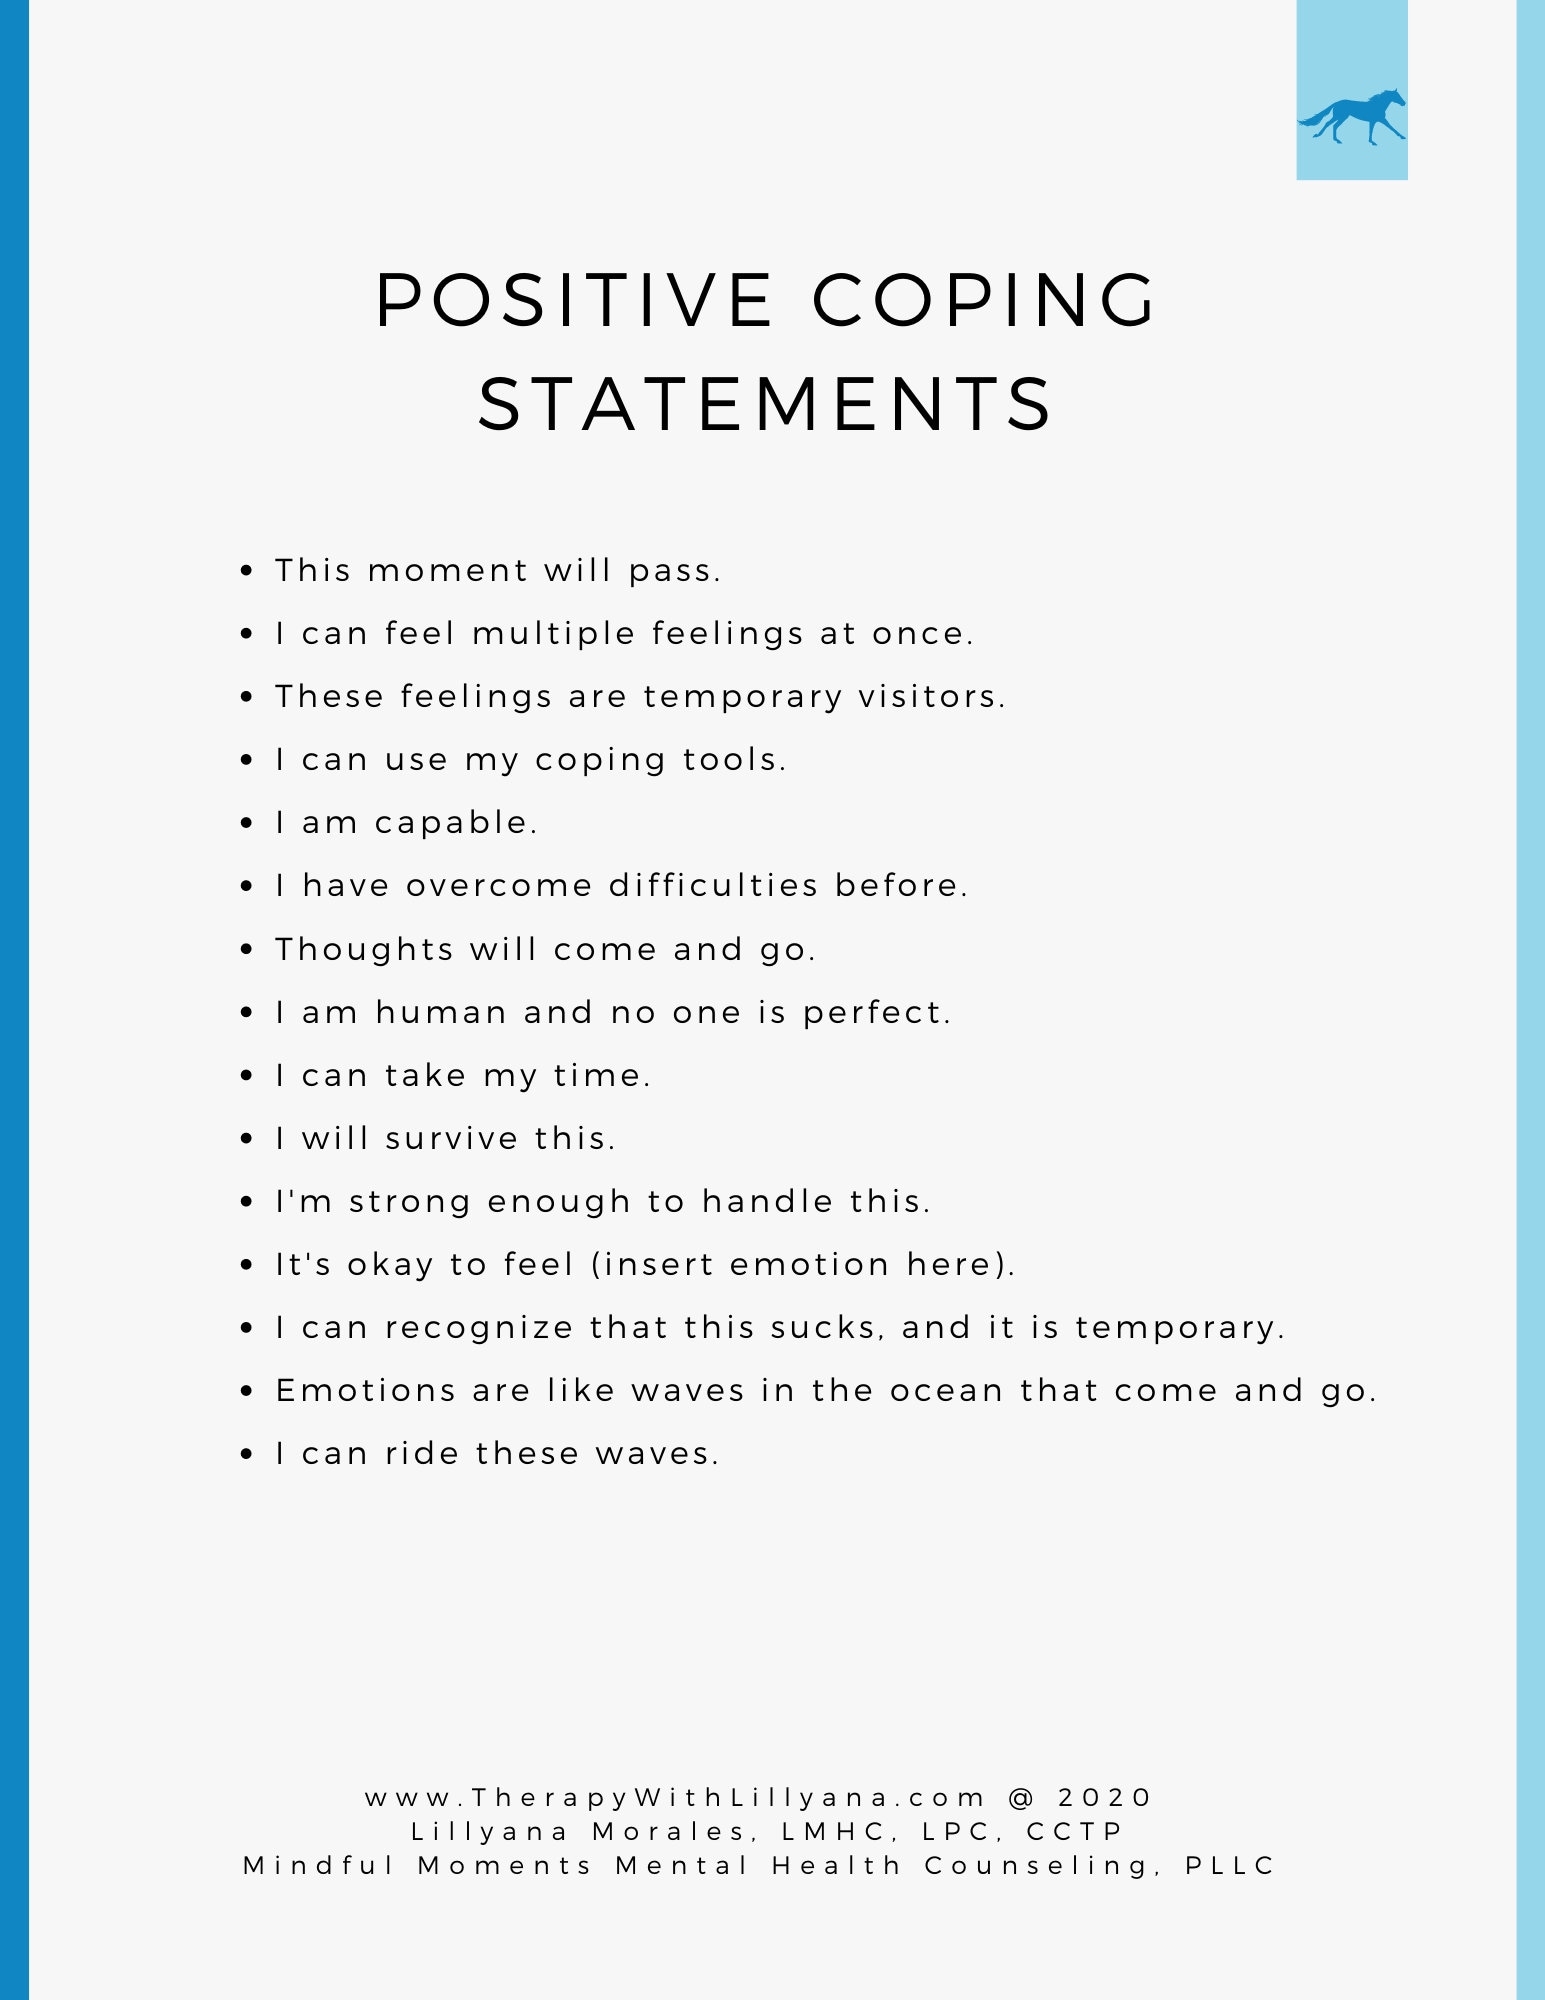 DBT Distress Tolerance Coping Worksheet By Licensed Therapist To Improve Mental Wellness Etsy